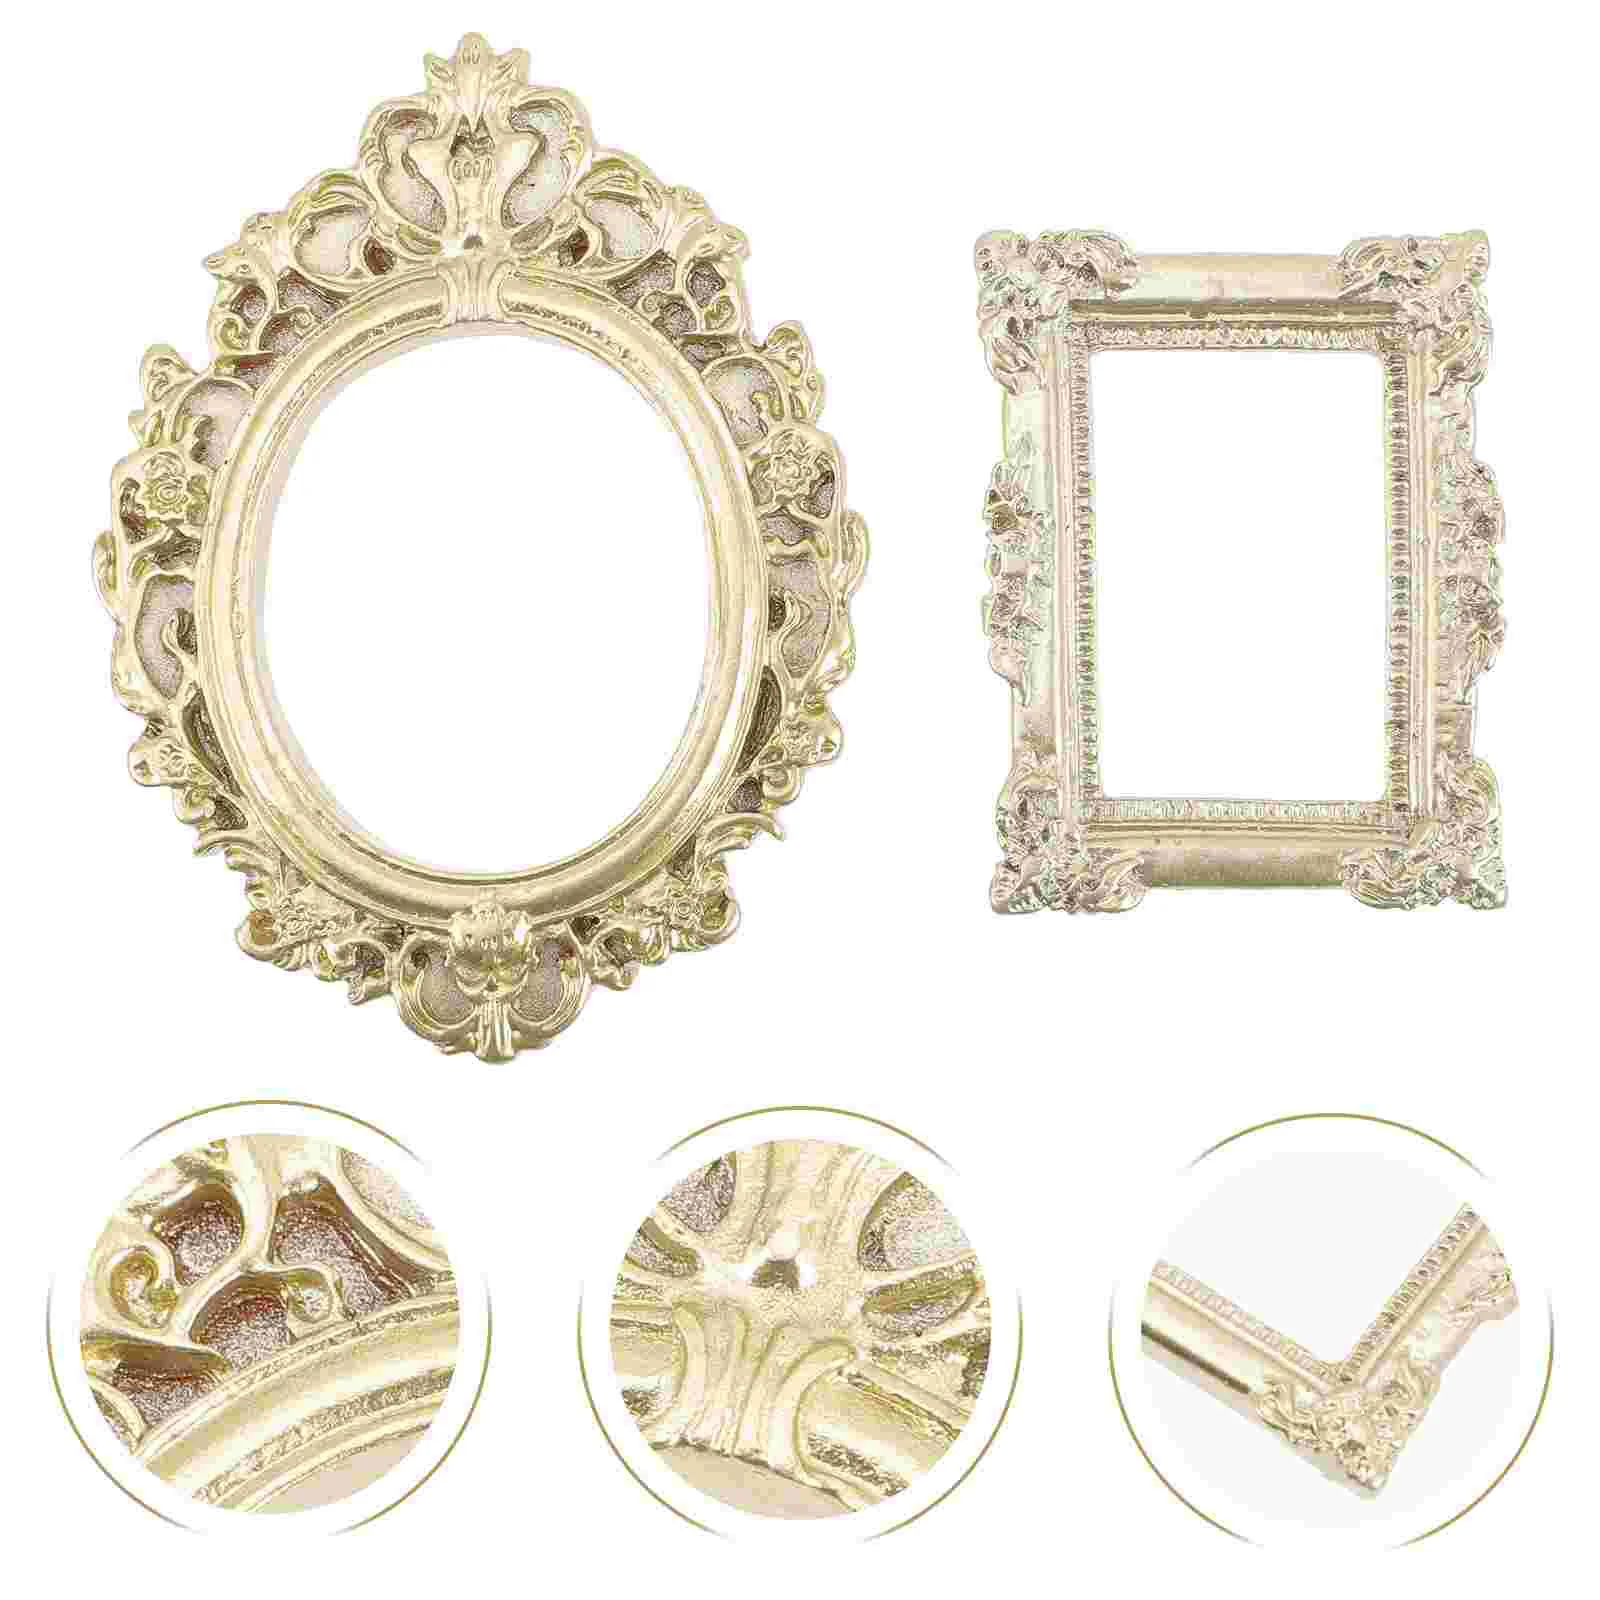 

12 Pcs Picture Display Holder Oval Frames DIY Mini Photo House Houses Vintage Baroque Miniature